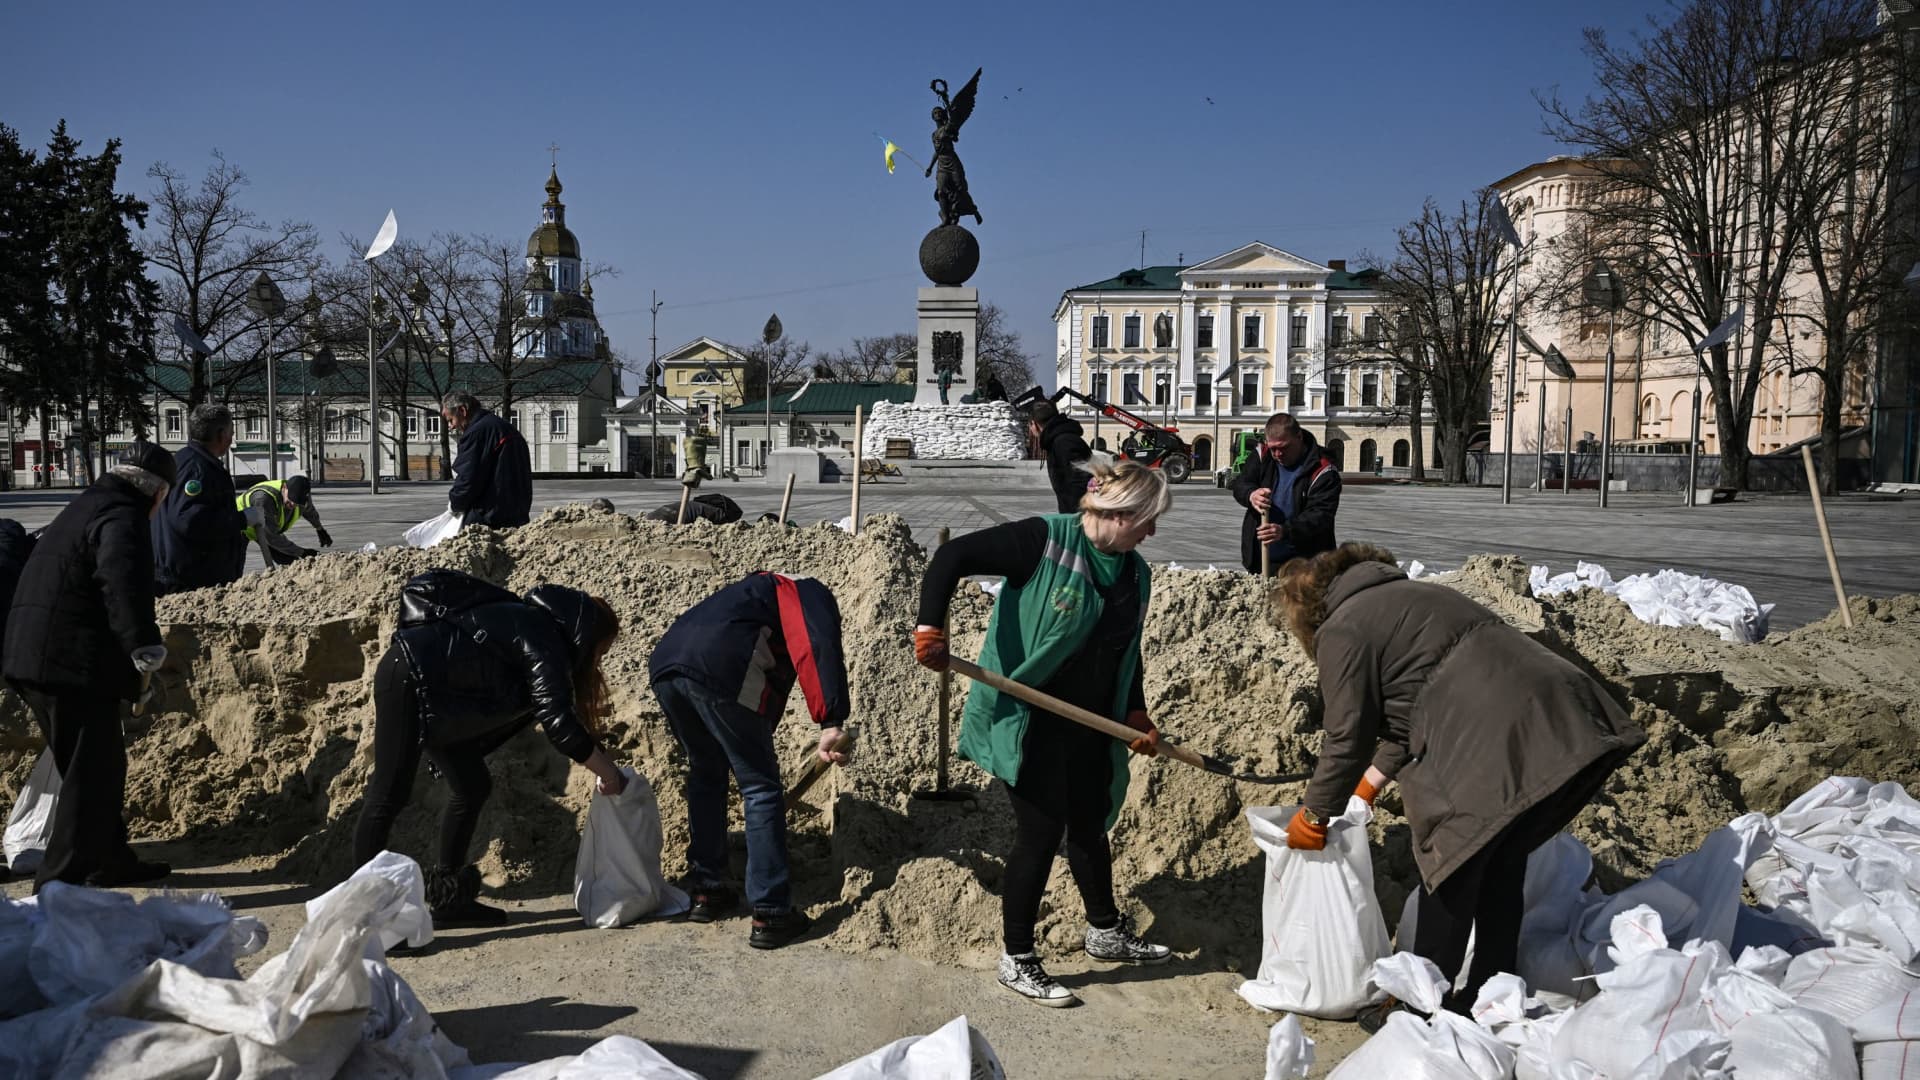 Kharkiv municipal employees fill bags with sand to protect the city's monuments from strikes on March 26, 2022 in Kharkiv where local authorities reported 44 Russian artillery bombardments and 140 rocket assaults in a single day.